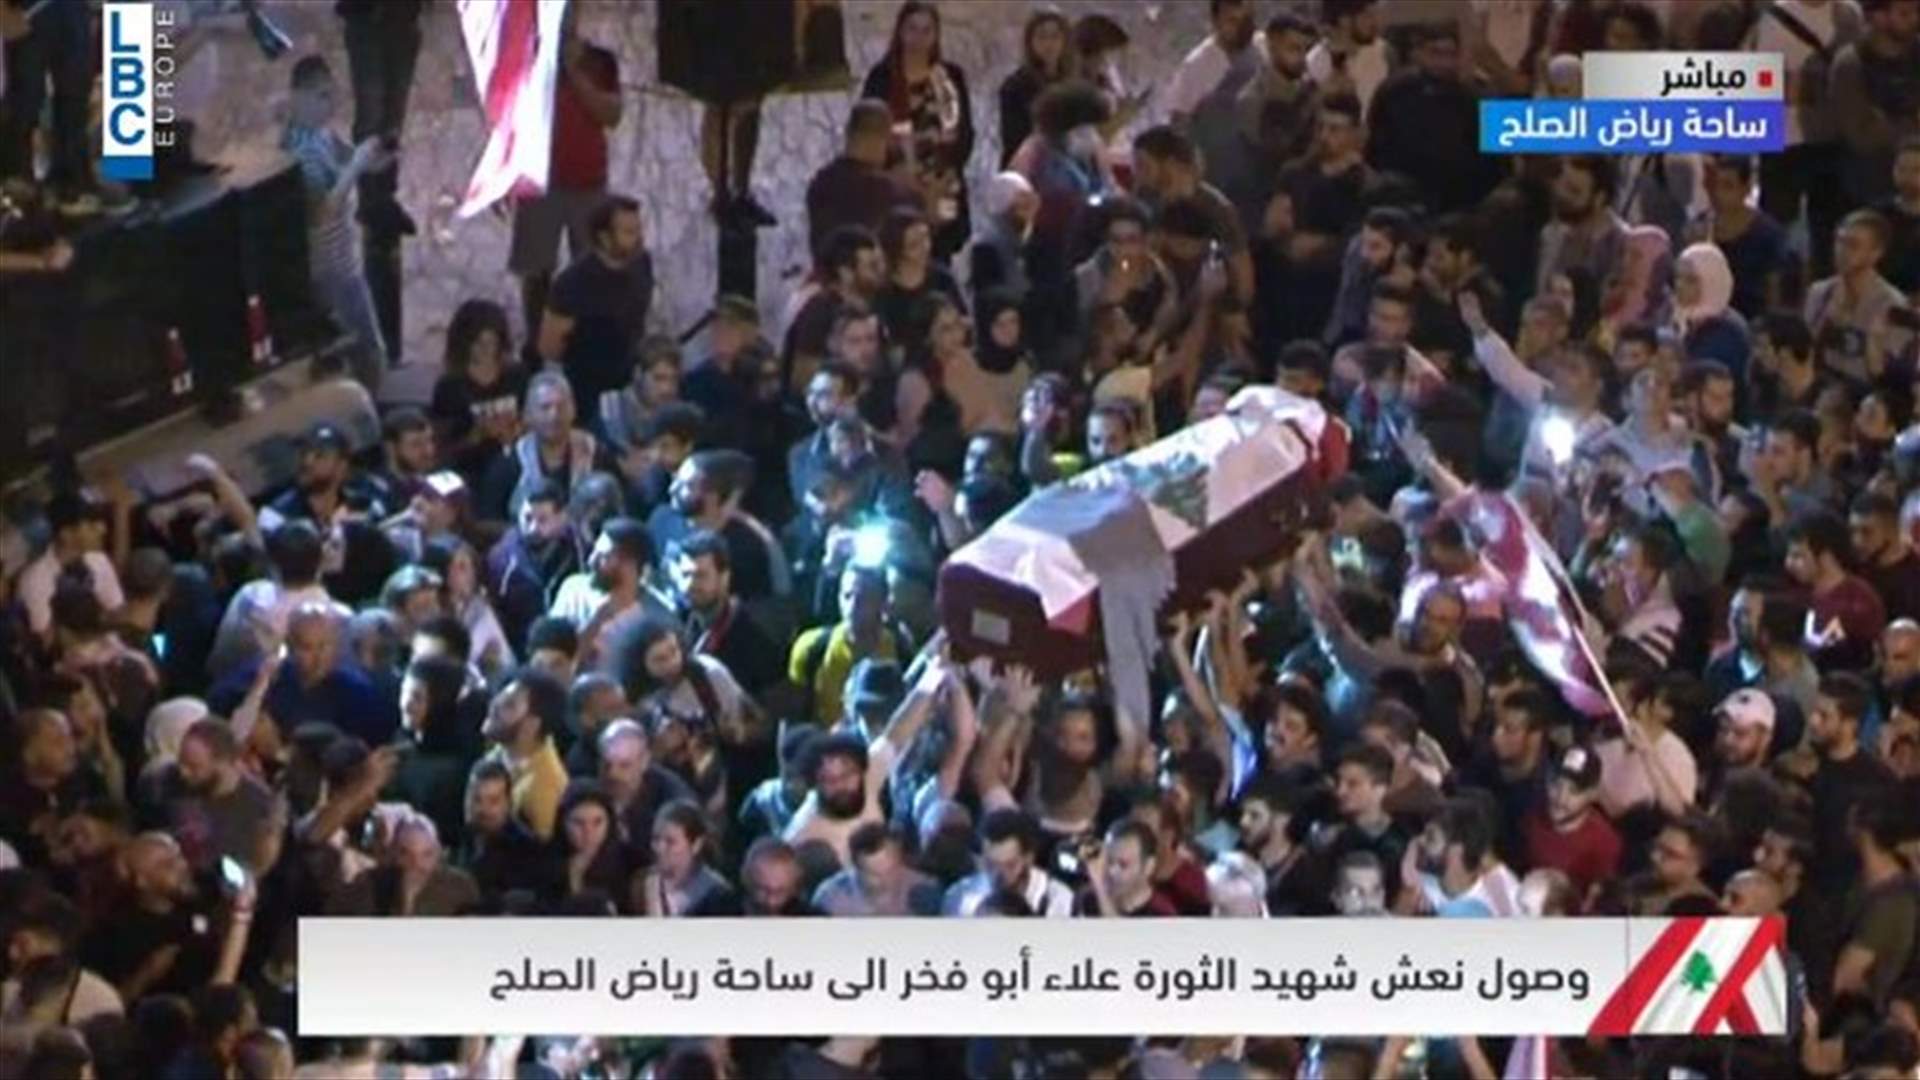 Protesters carry coffin of Revolution’s Martyr Alaa Abou Fakher in Riad al-Solh (Video)